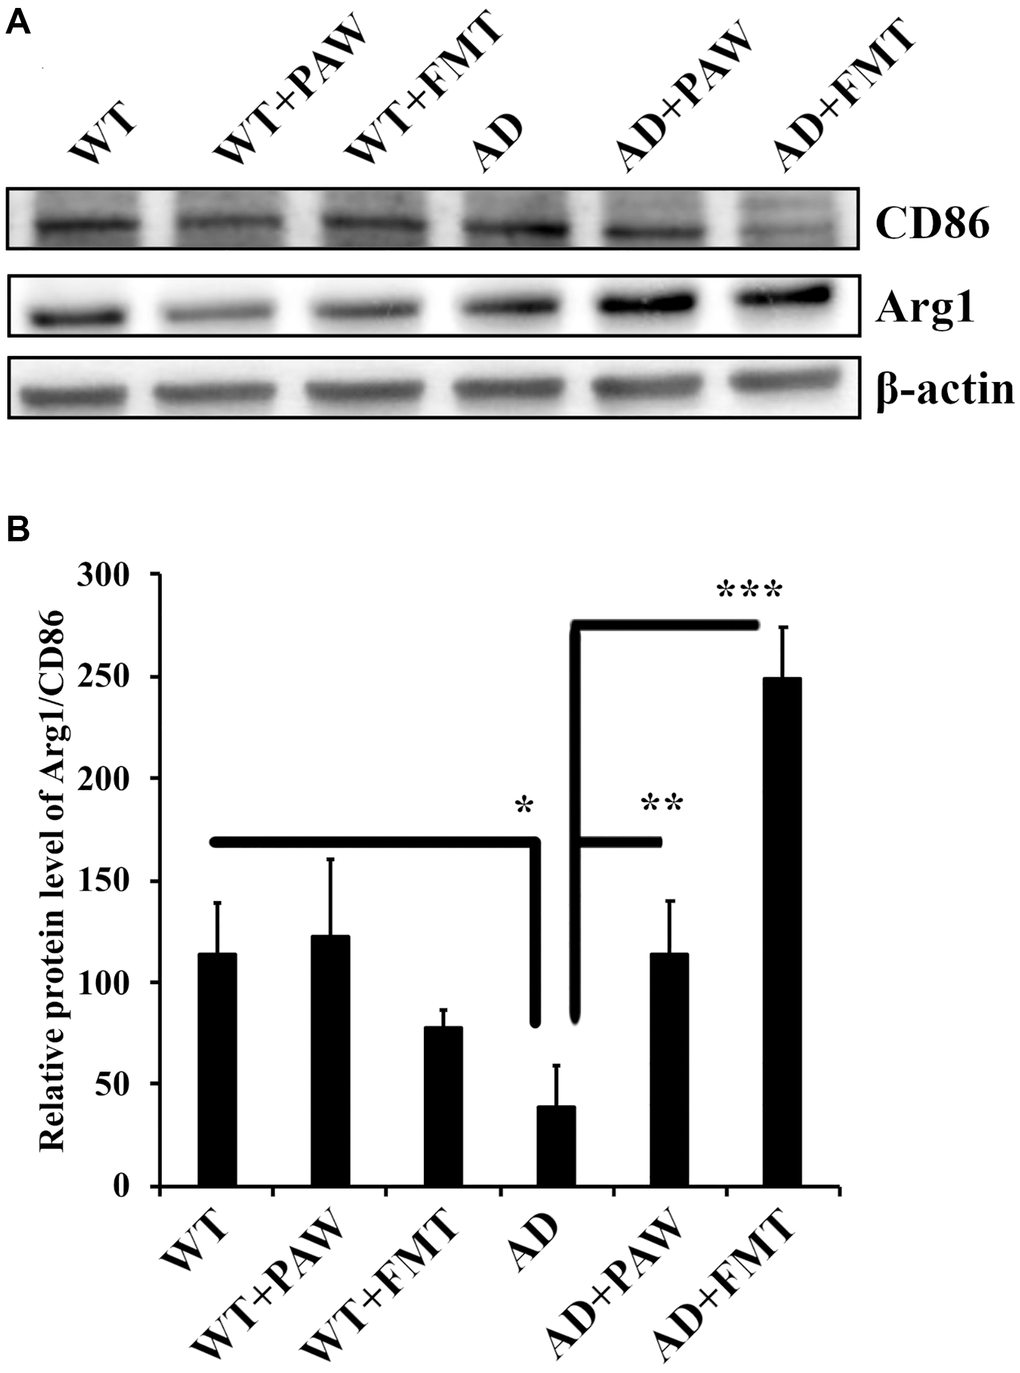 Protein levels of arginase-1 and CD86 in the cortex of wild-type (WT) and AD mice. (A) Western blot analysis of arginase-1 (Arg1) and CD86 in the cortex of WT and AD mice fed PAW (WT+PAW, AD+PAW) and FMT (WT+FMT and AD+FMT). (B) Protein levels of Arg1 and CD86 were quantified from (A). All results were analyzed by ANOVA with a post hoc analysis. (*p **p ***p 